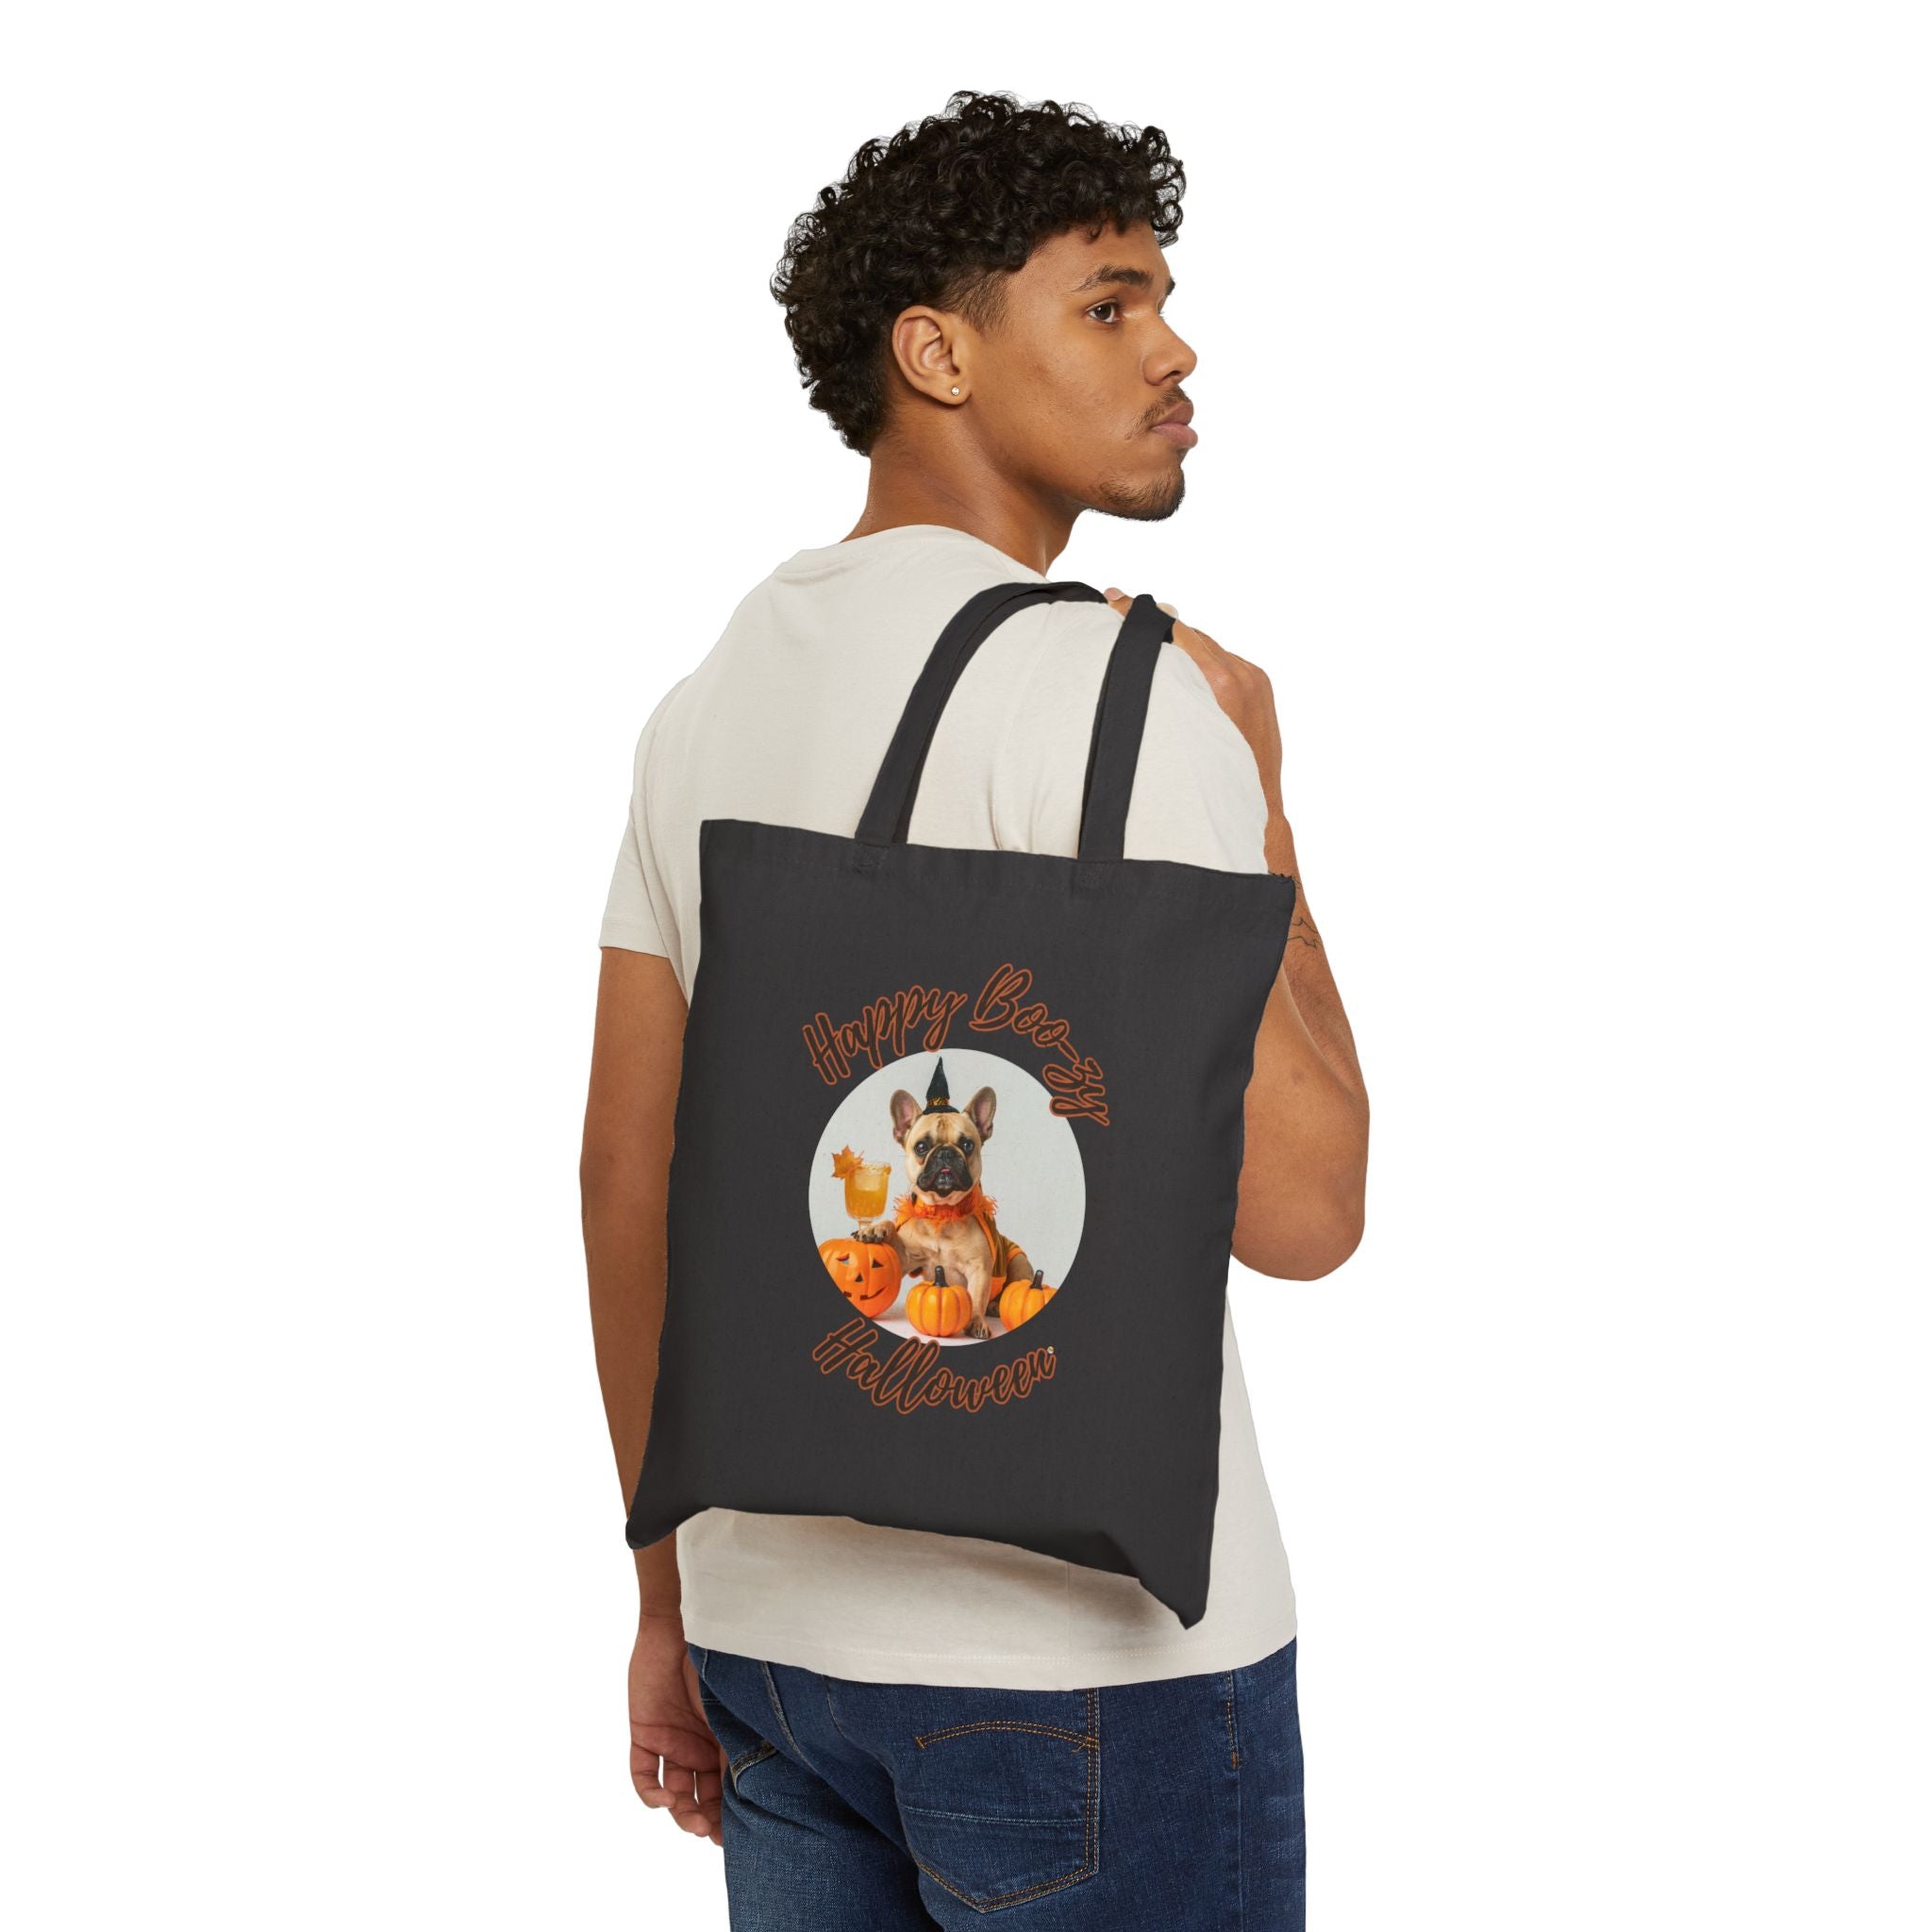 "Happy Boo-zy Halloween" Trick or Treat Canvas Tote Bag (Tan/French)